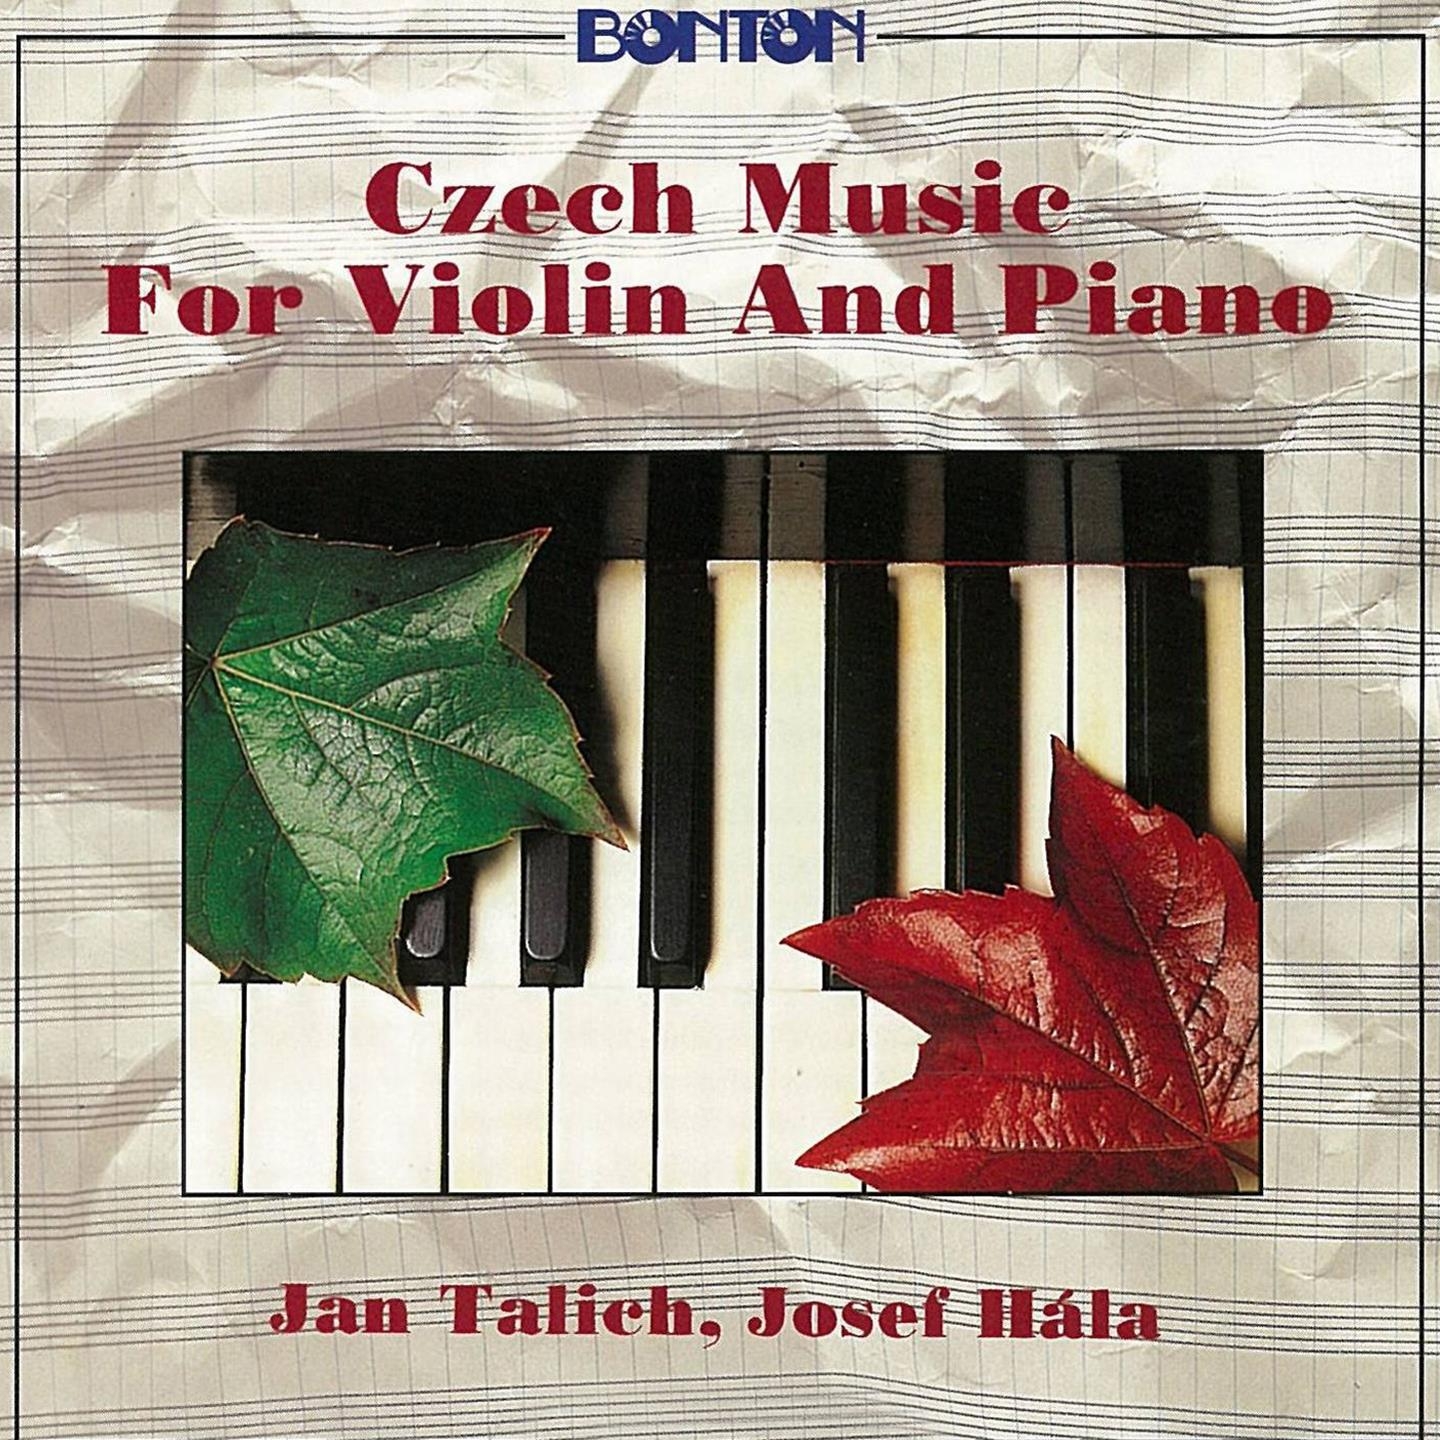 Four Pieces for Violin and Piano, Op. 17, .: Appassionato